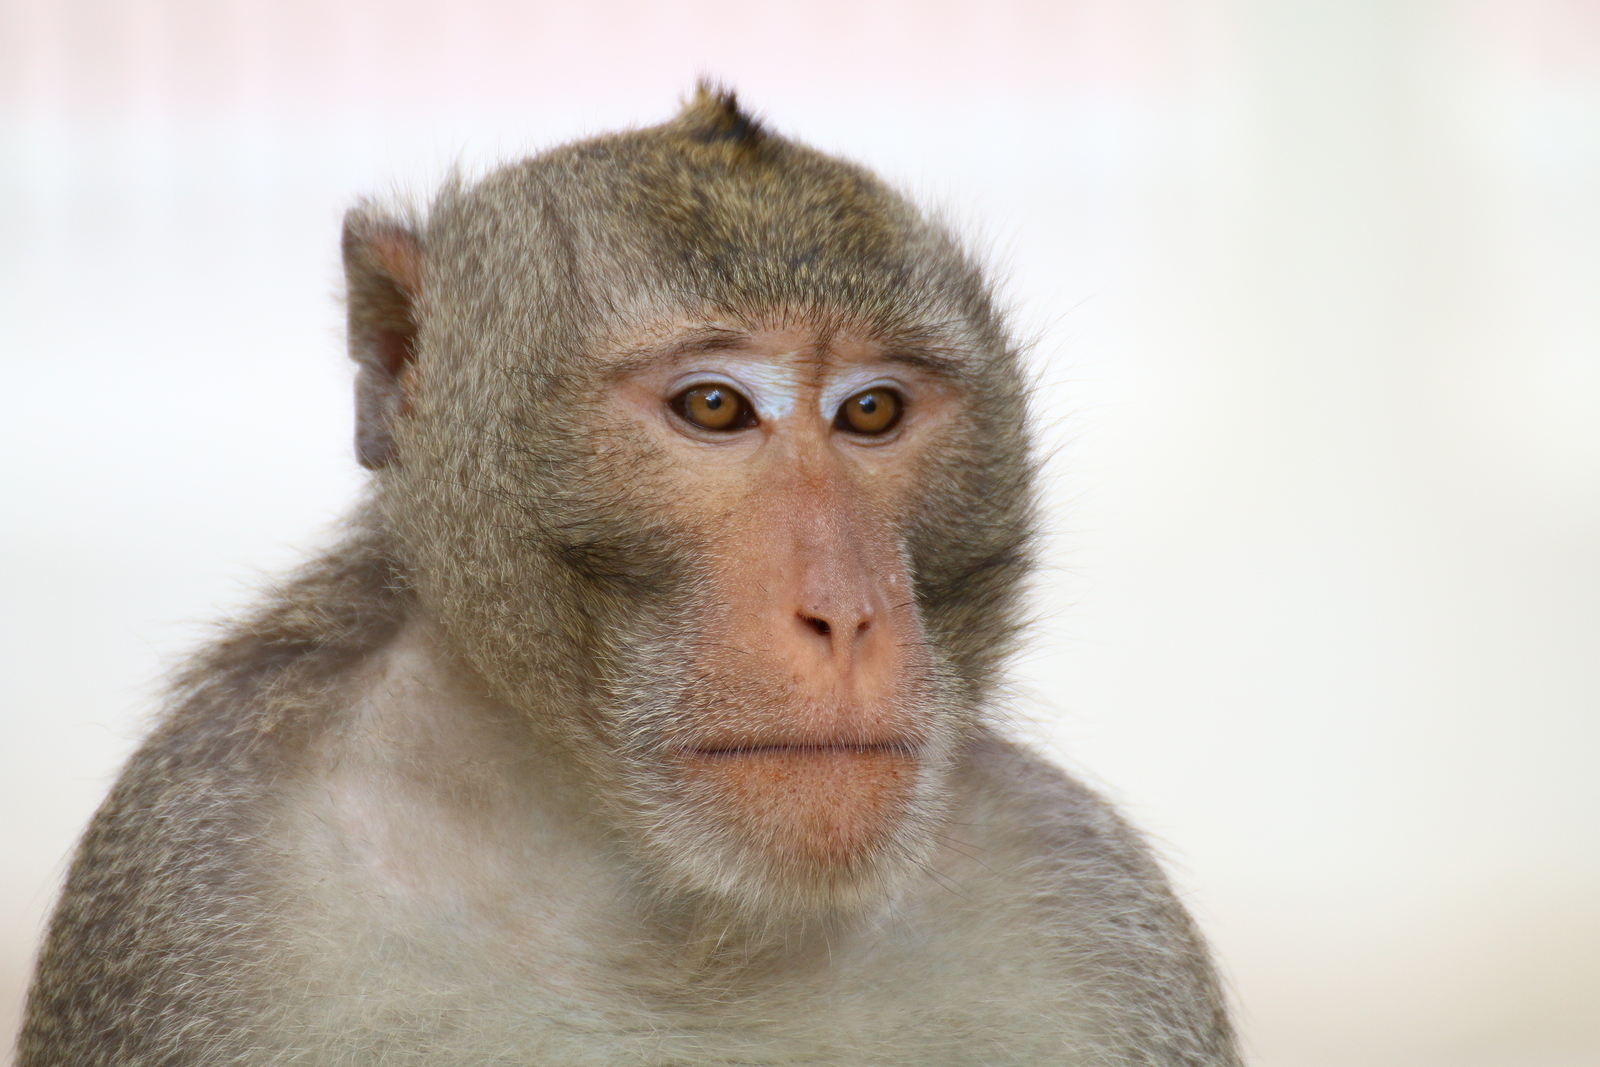 CNN: Chinese scientists defend implanting human gene into monkeys’ brains